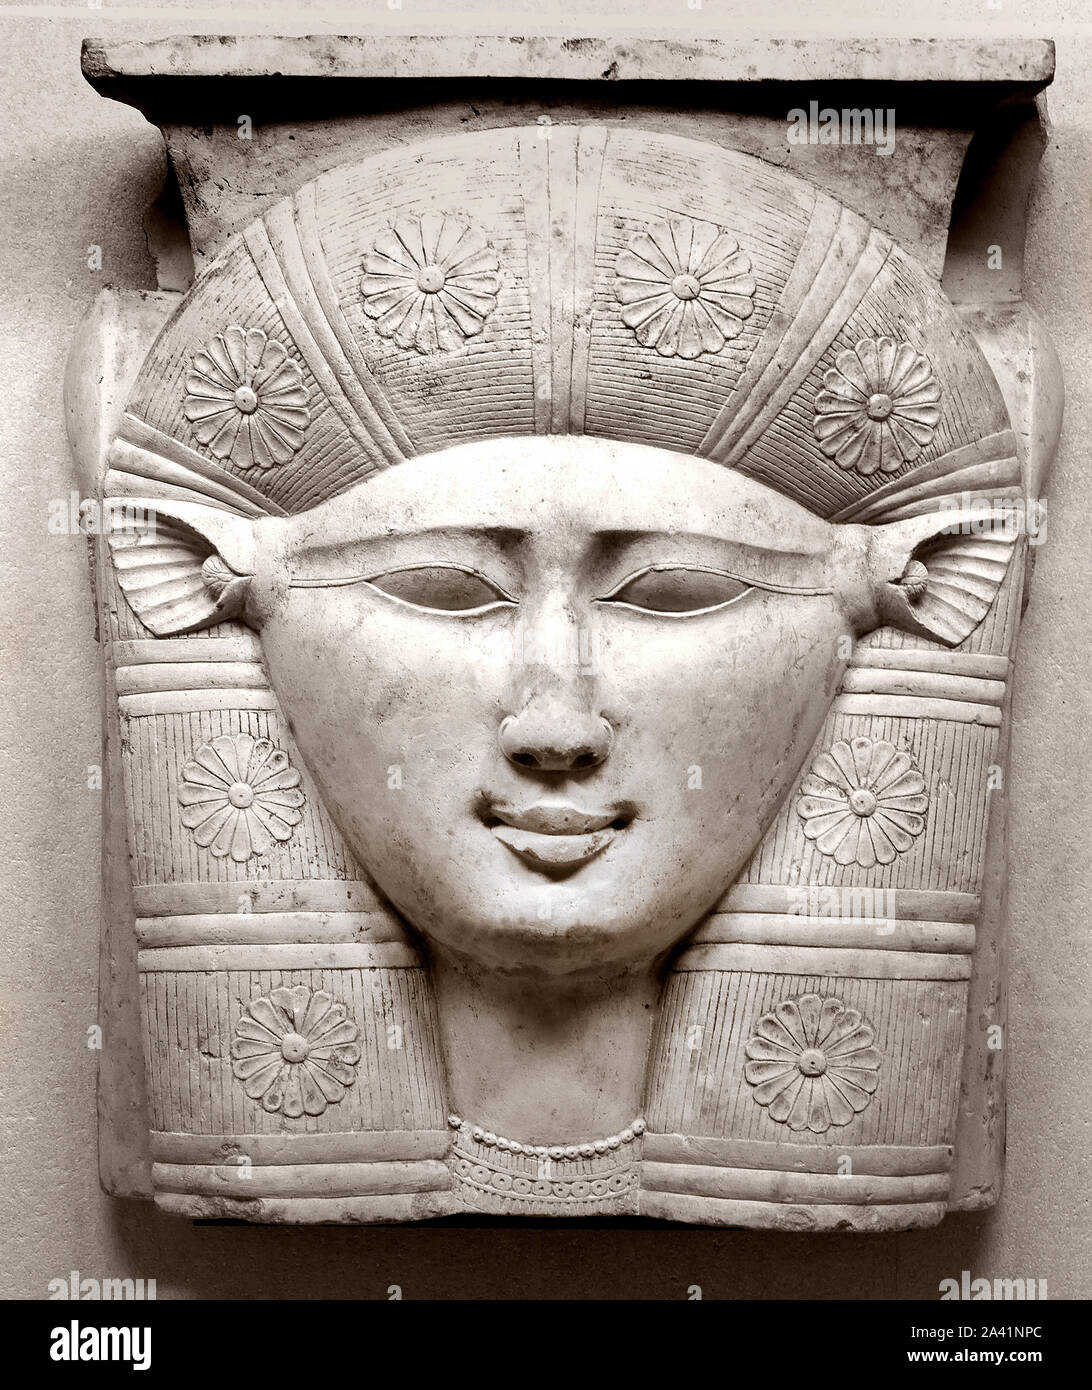 The face of the goddess Hathor, with cow's ears 3rd century BC fragment of the capital of a column limestone Egypt Egyptian Stock Photo